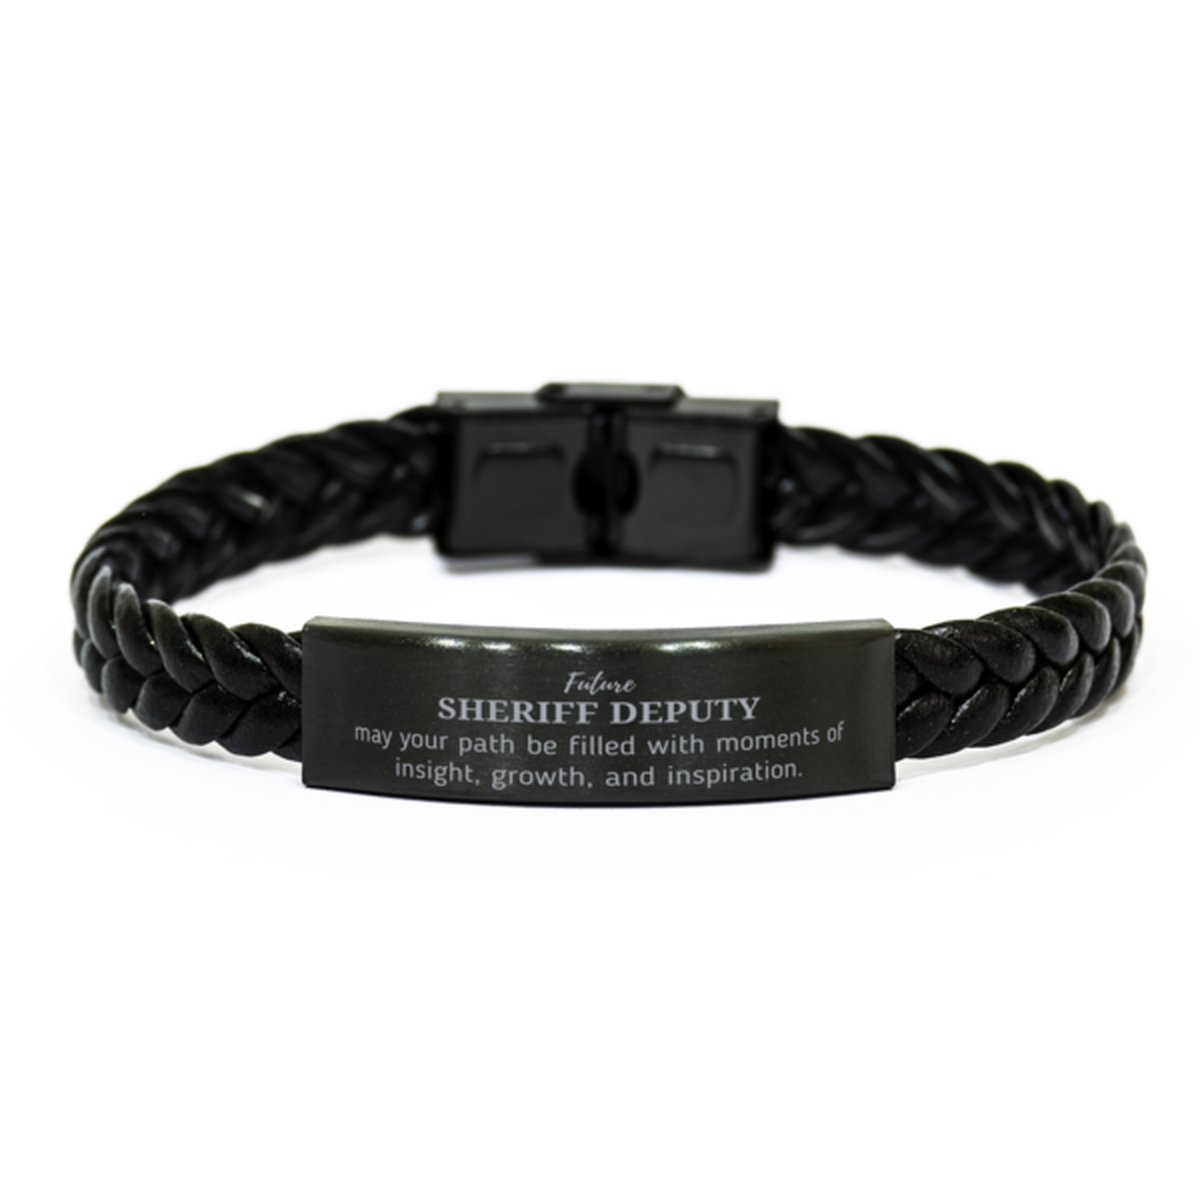 Future Sheriff Deputy Gifts, May your path be filled with moments of insight, Graduation Gifts for New Sheriff Deputy, Christmas Unique Braided Leather Bracelet For Men, Women, Friends